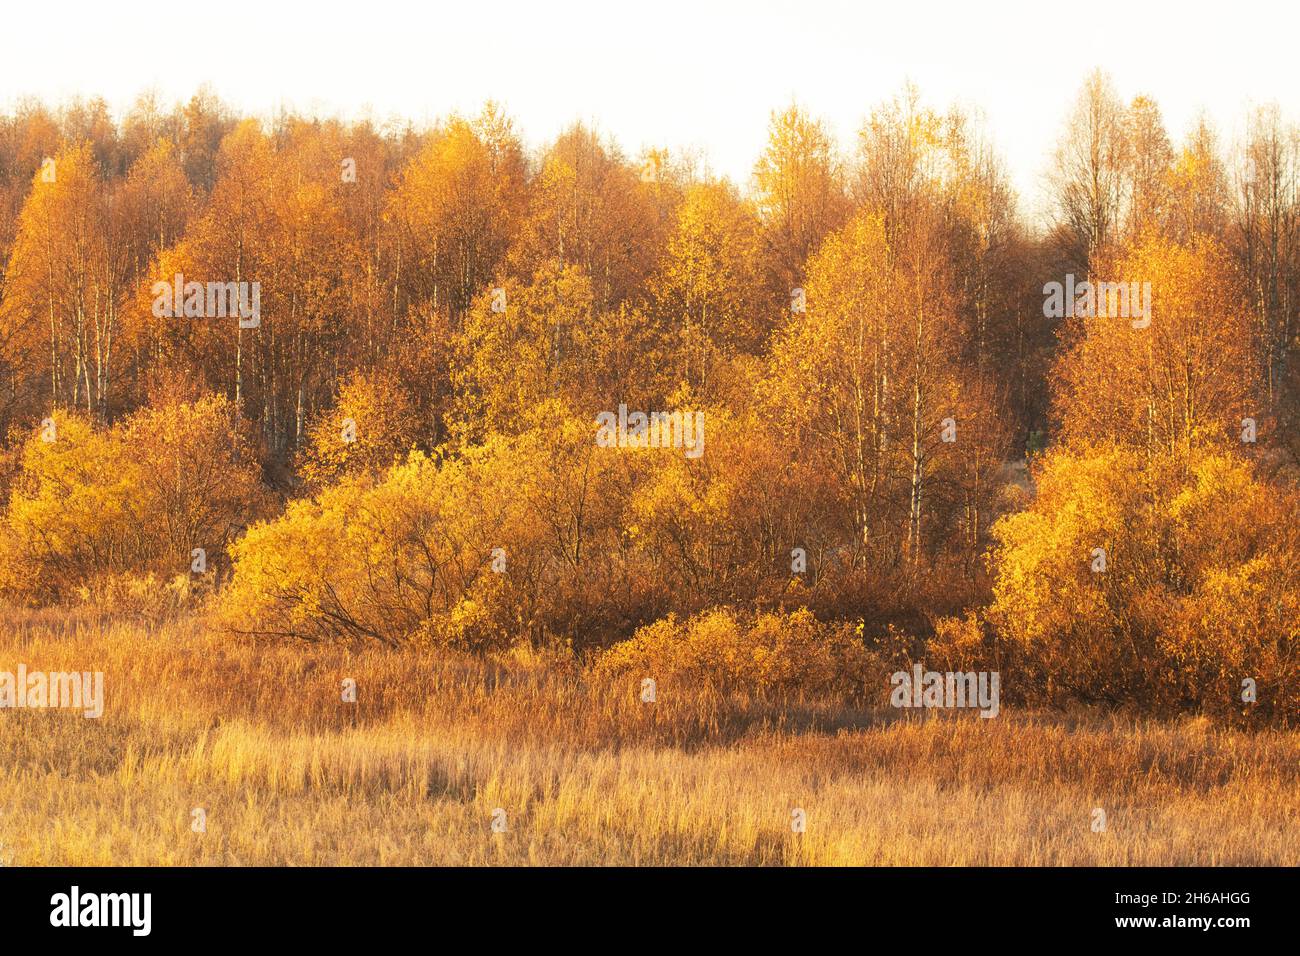 Colorful Birch trees during autumn foliage in Northern Finland. Stock Photo